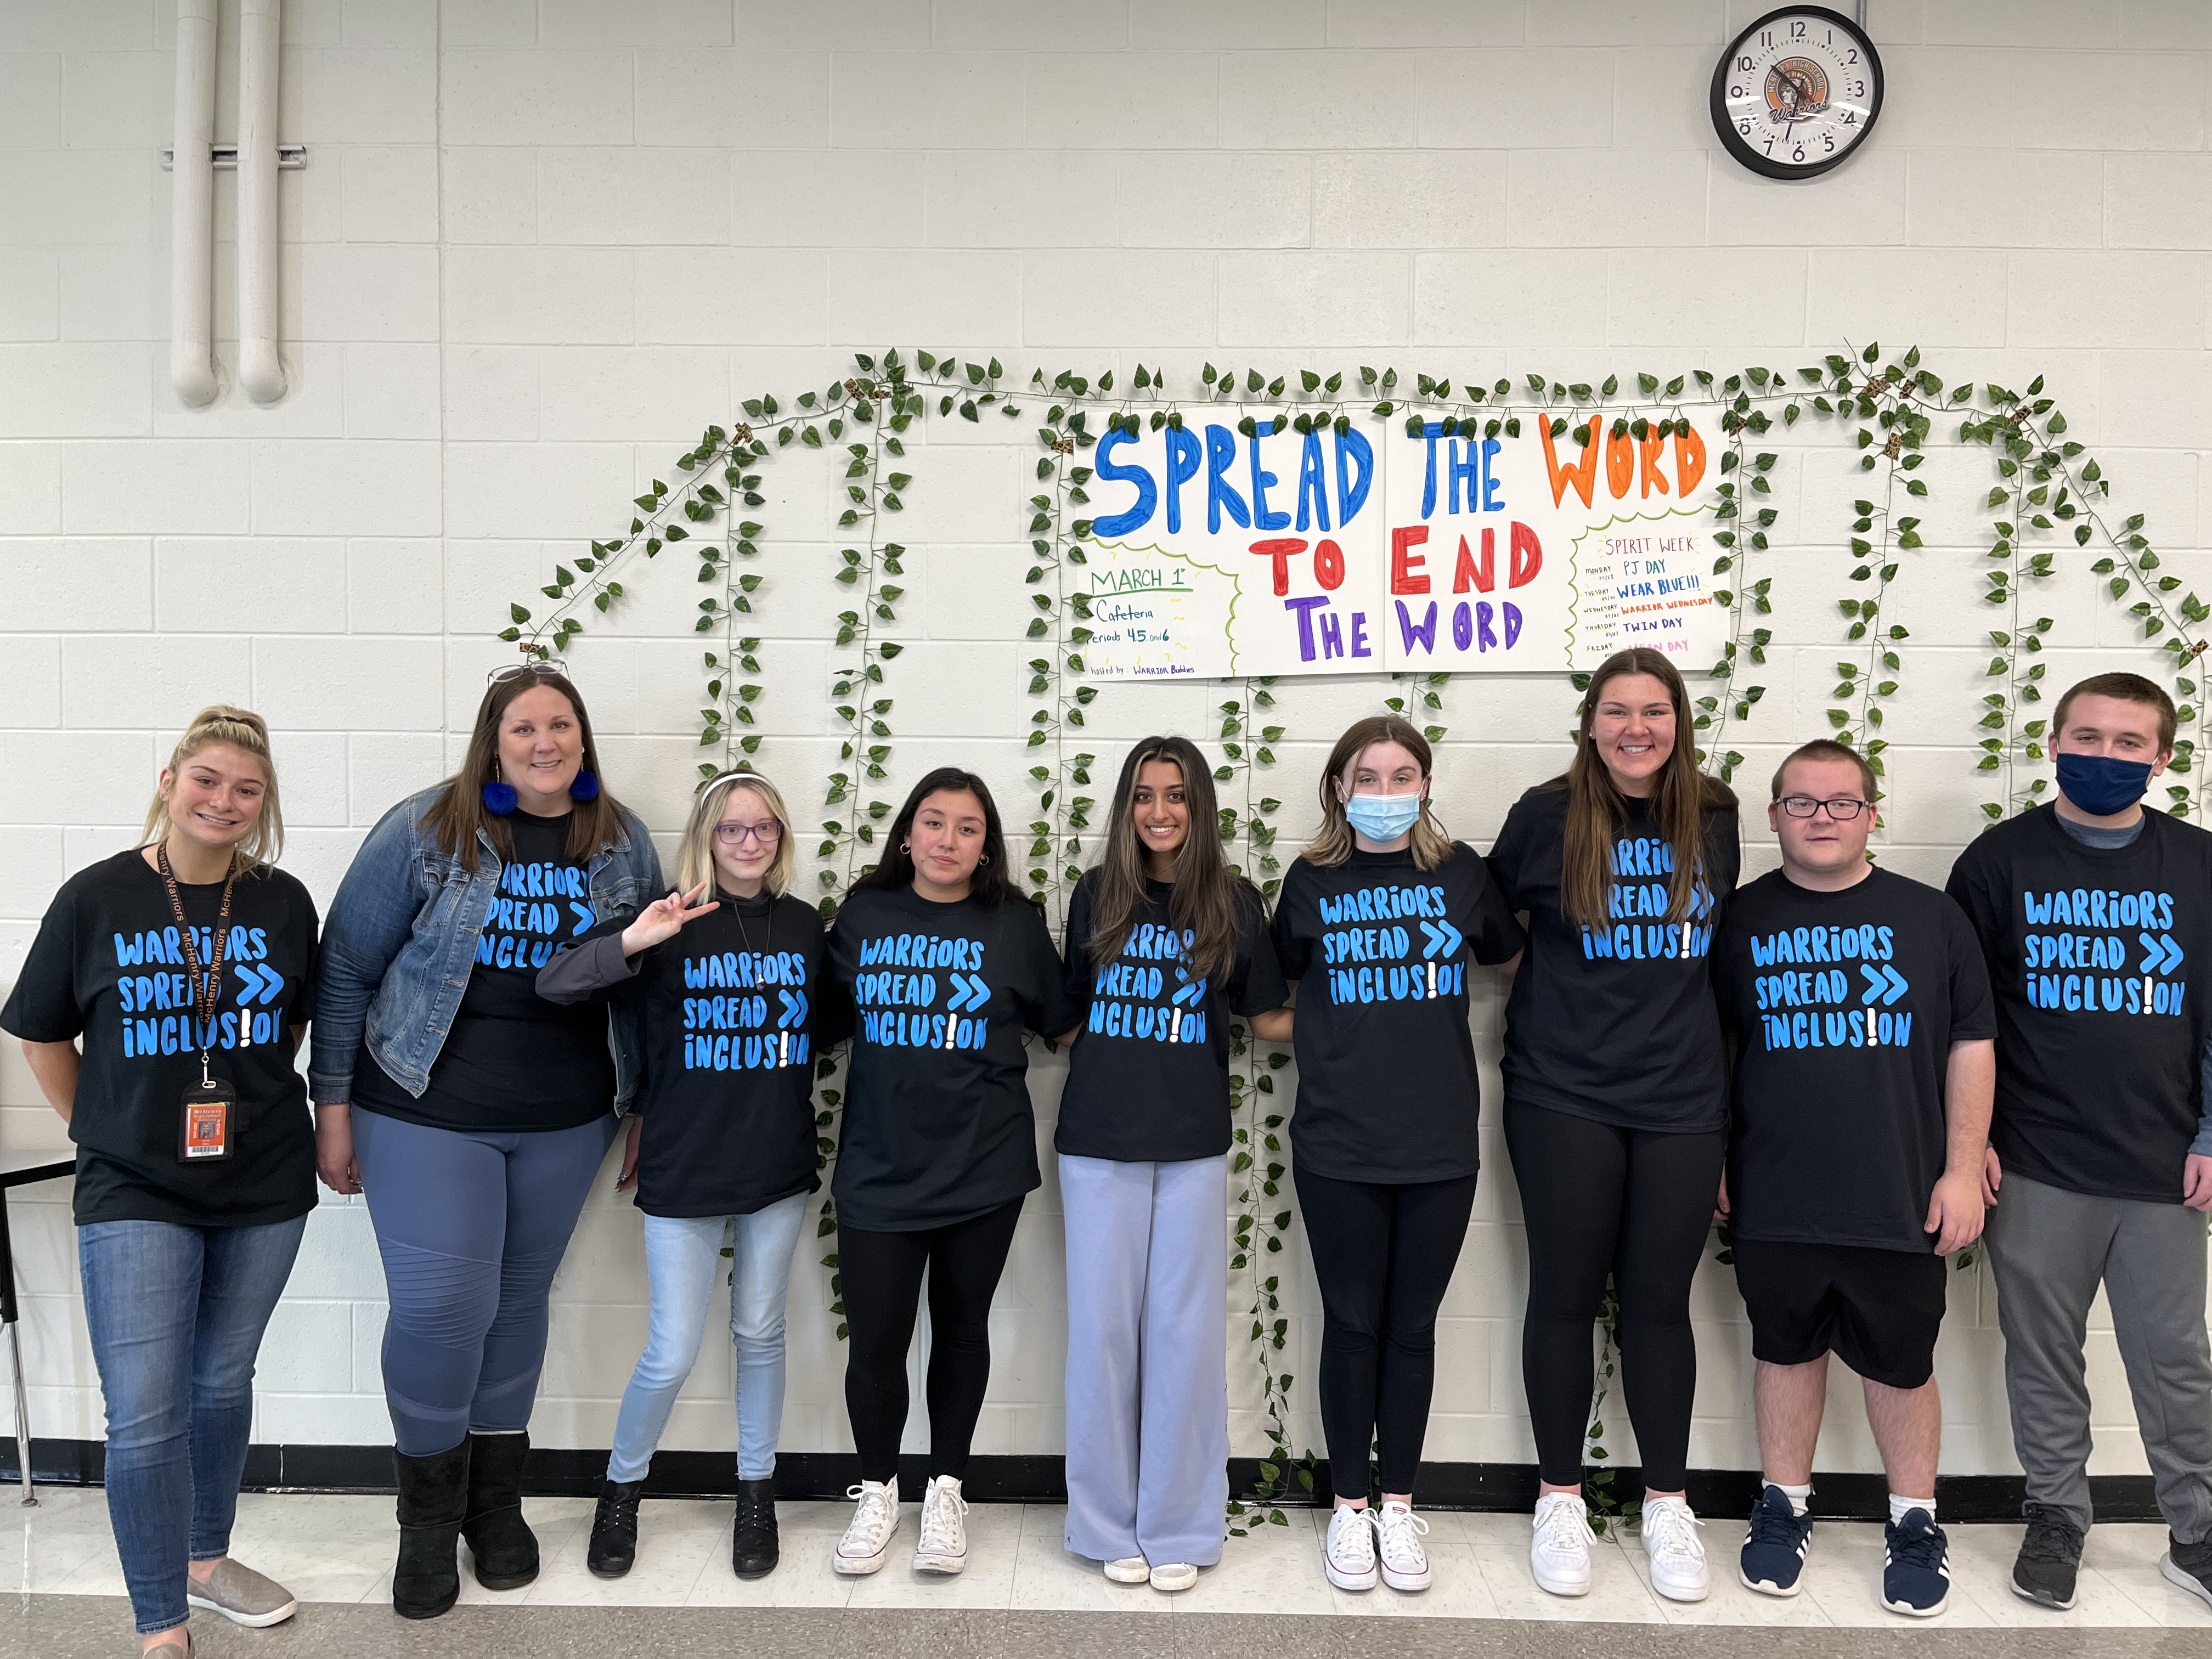 Students and staff stand against a white wall decorated with artificial leafy vines and a poster that reads "Spread the word to end the word: Warriors Spread Inclusion"